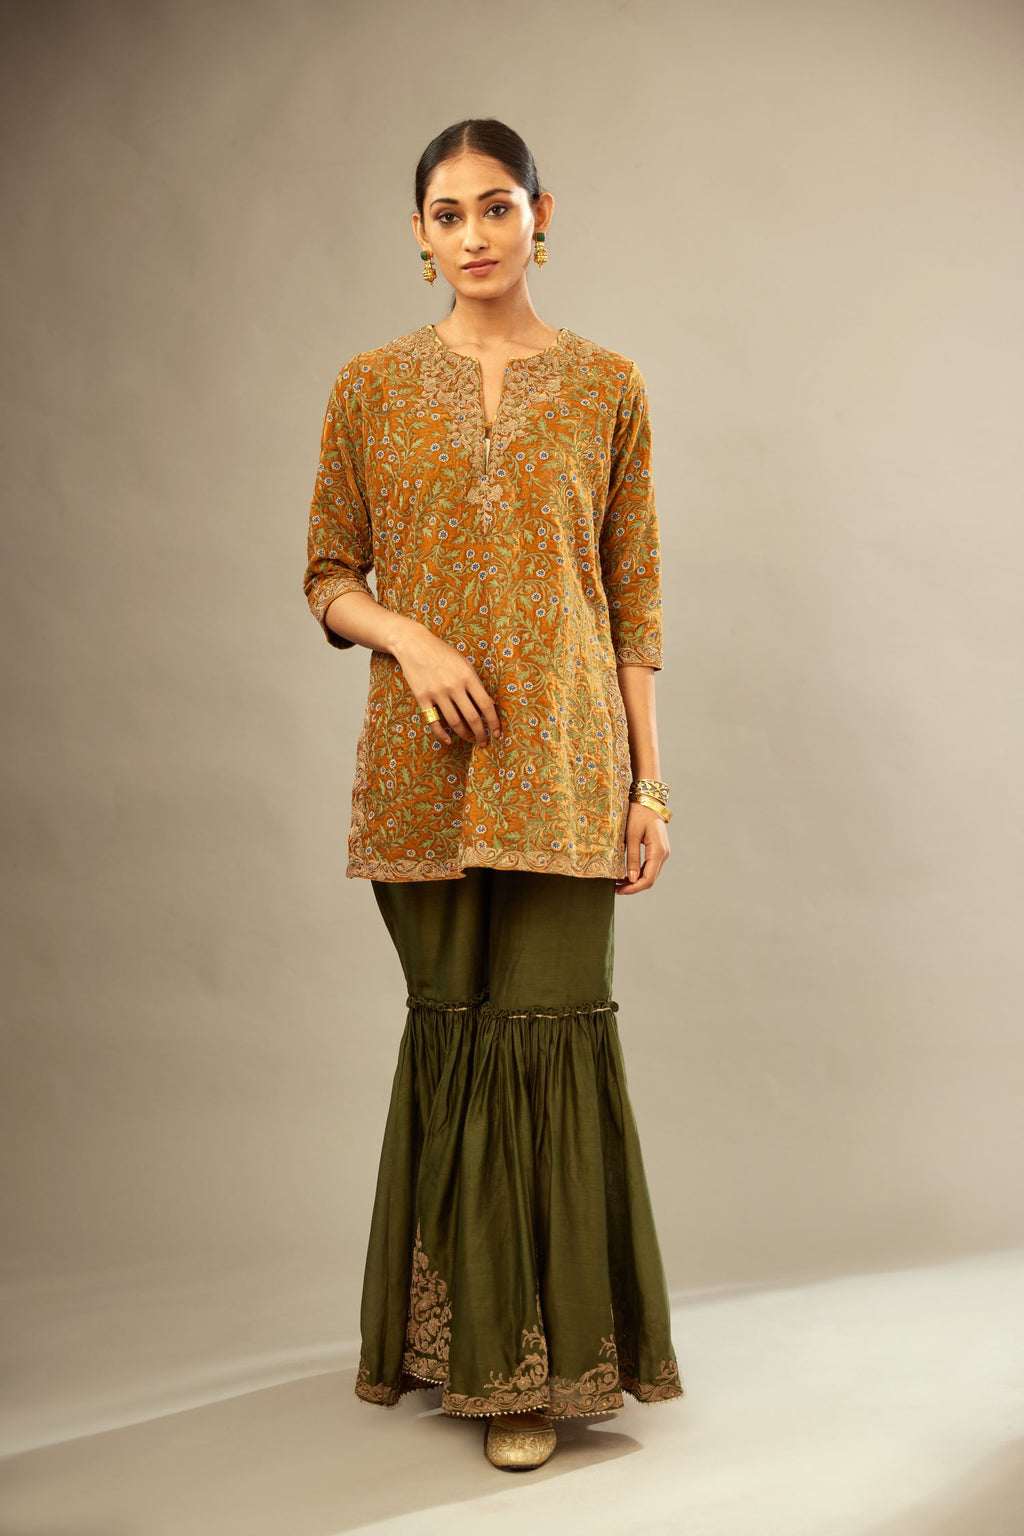 Mustard yellow silk velvet short kurta set with all-over silk thread jaal embroidery, detailed with gold dori embroidery.